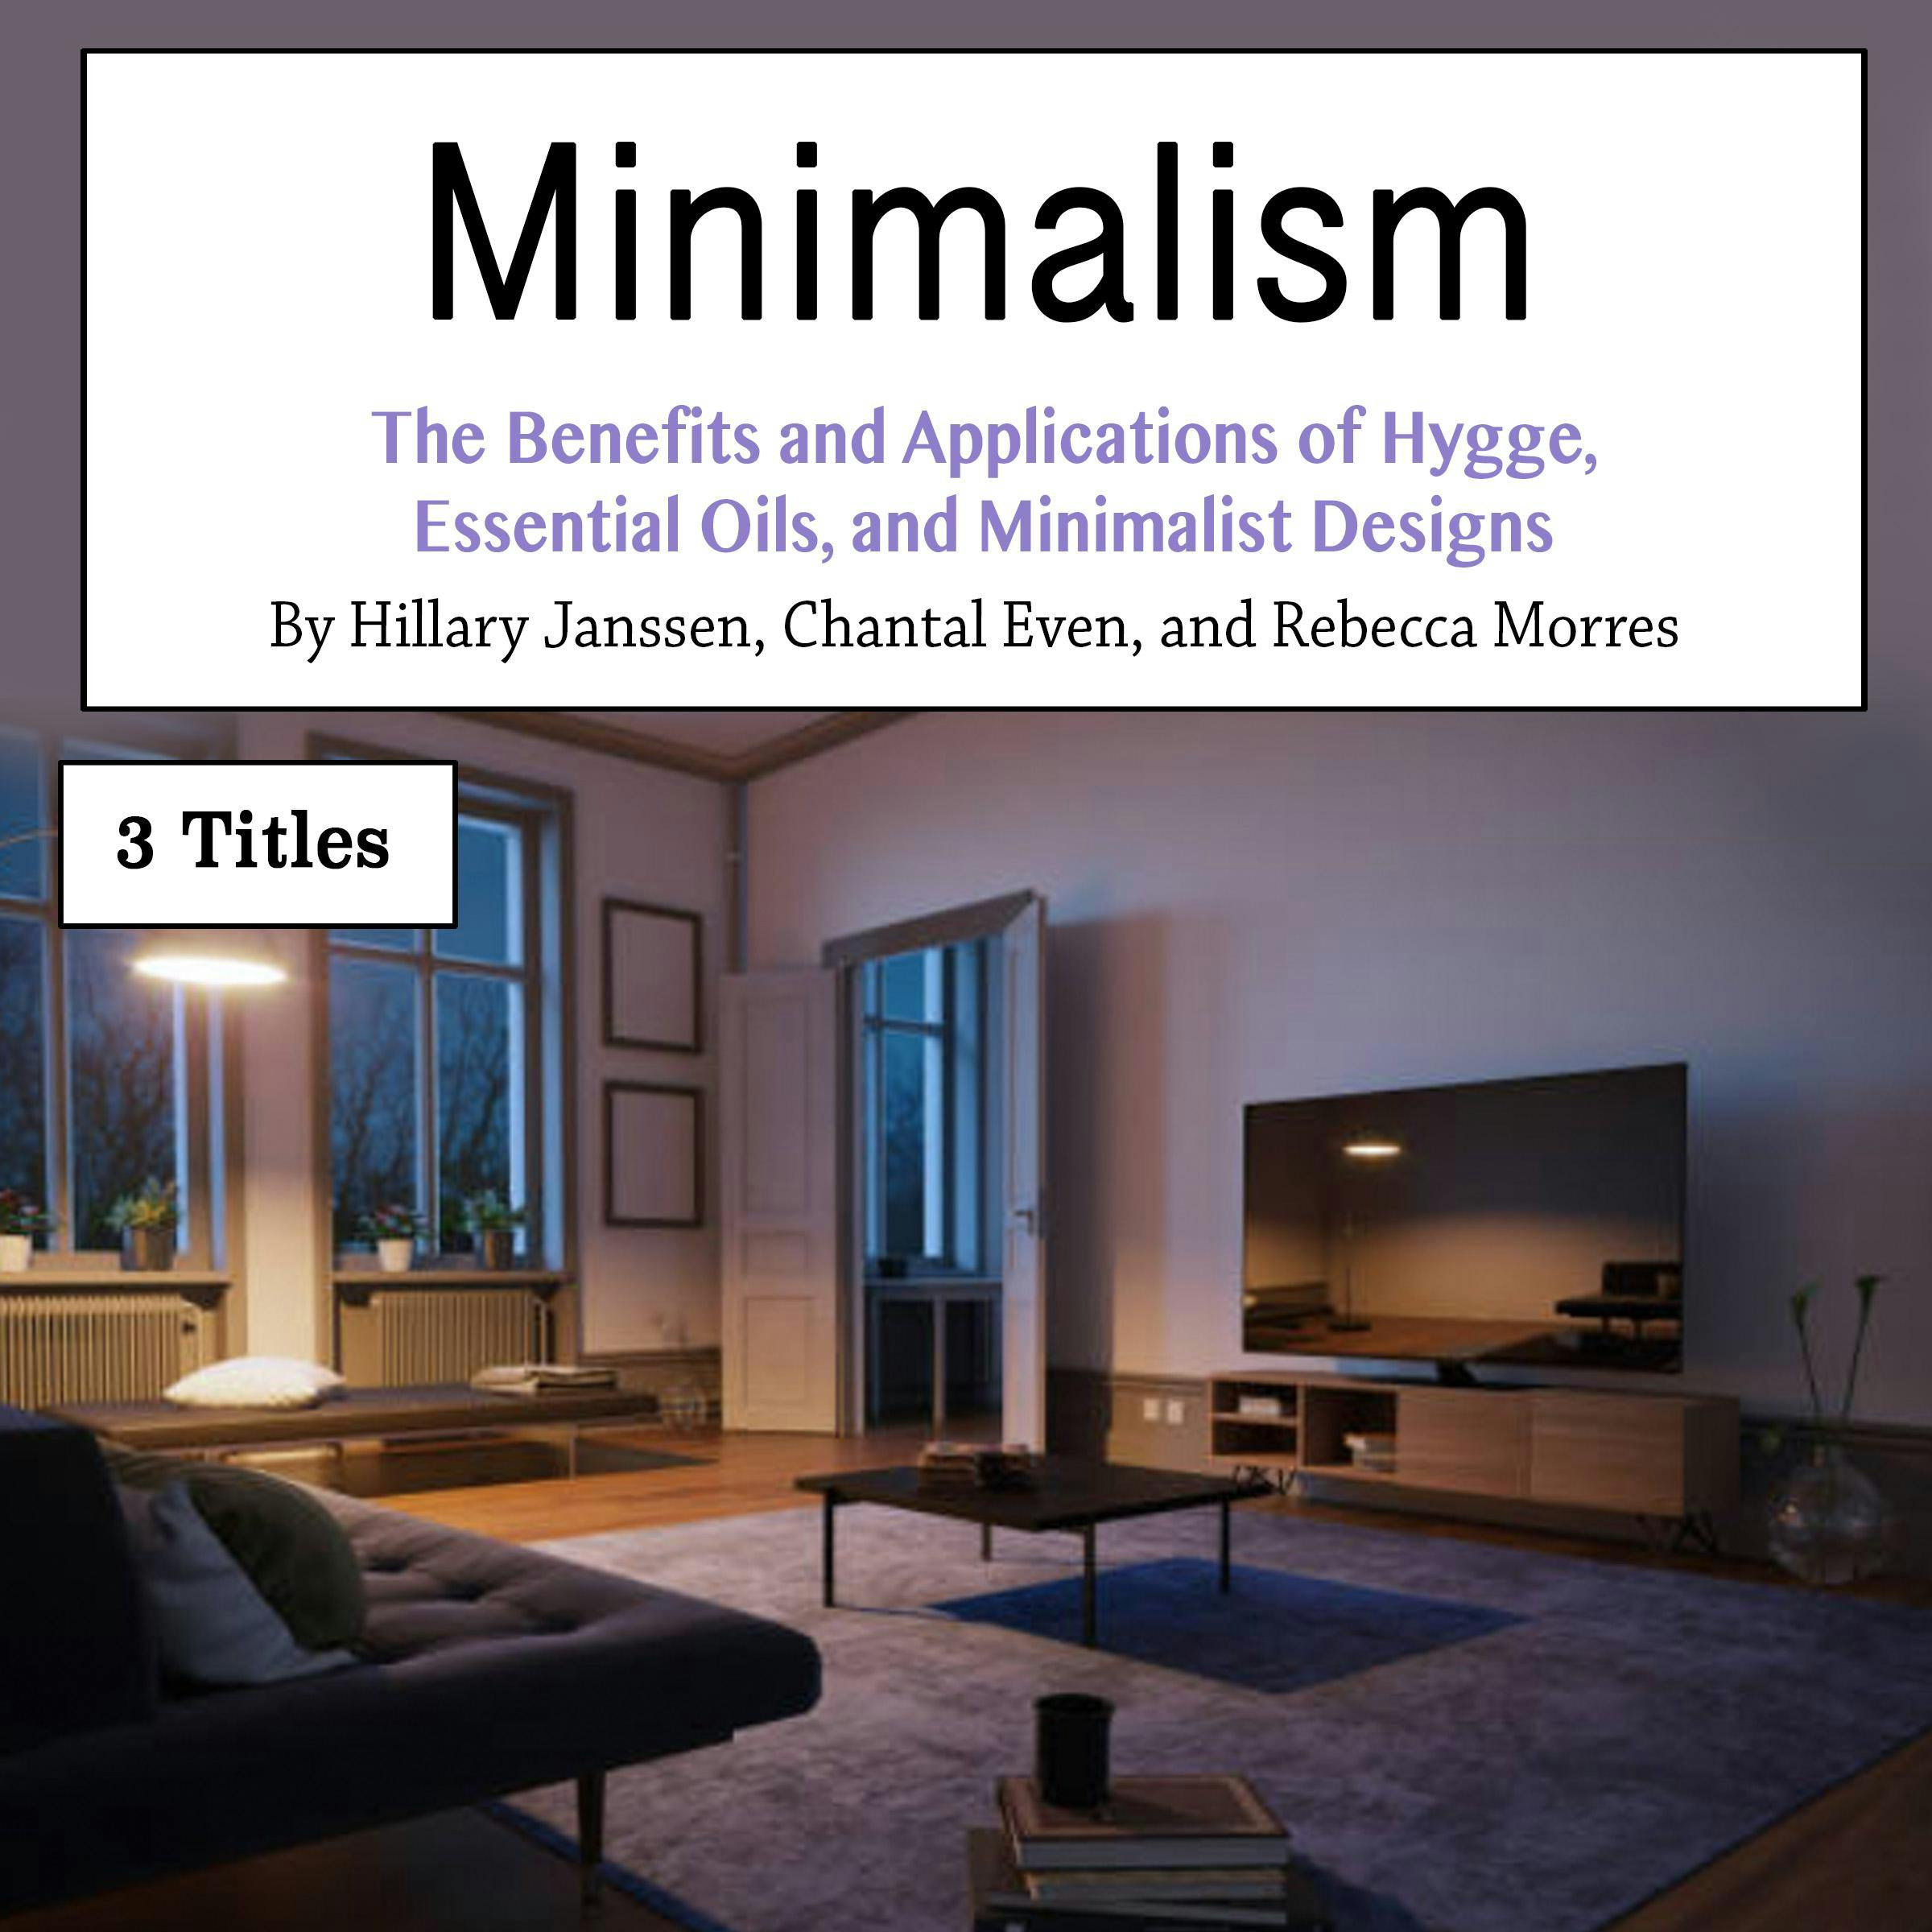 Minimalism: The Benefits and Applications of Hygge, Essential Oils, and Minimalist Designs - Rebecca Morres, Hillary Janssen, Chantal Even